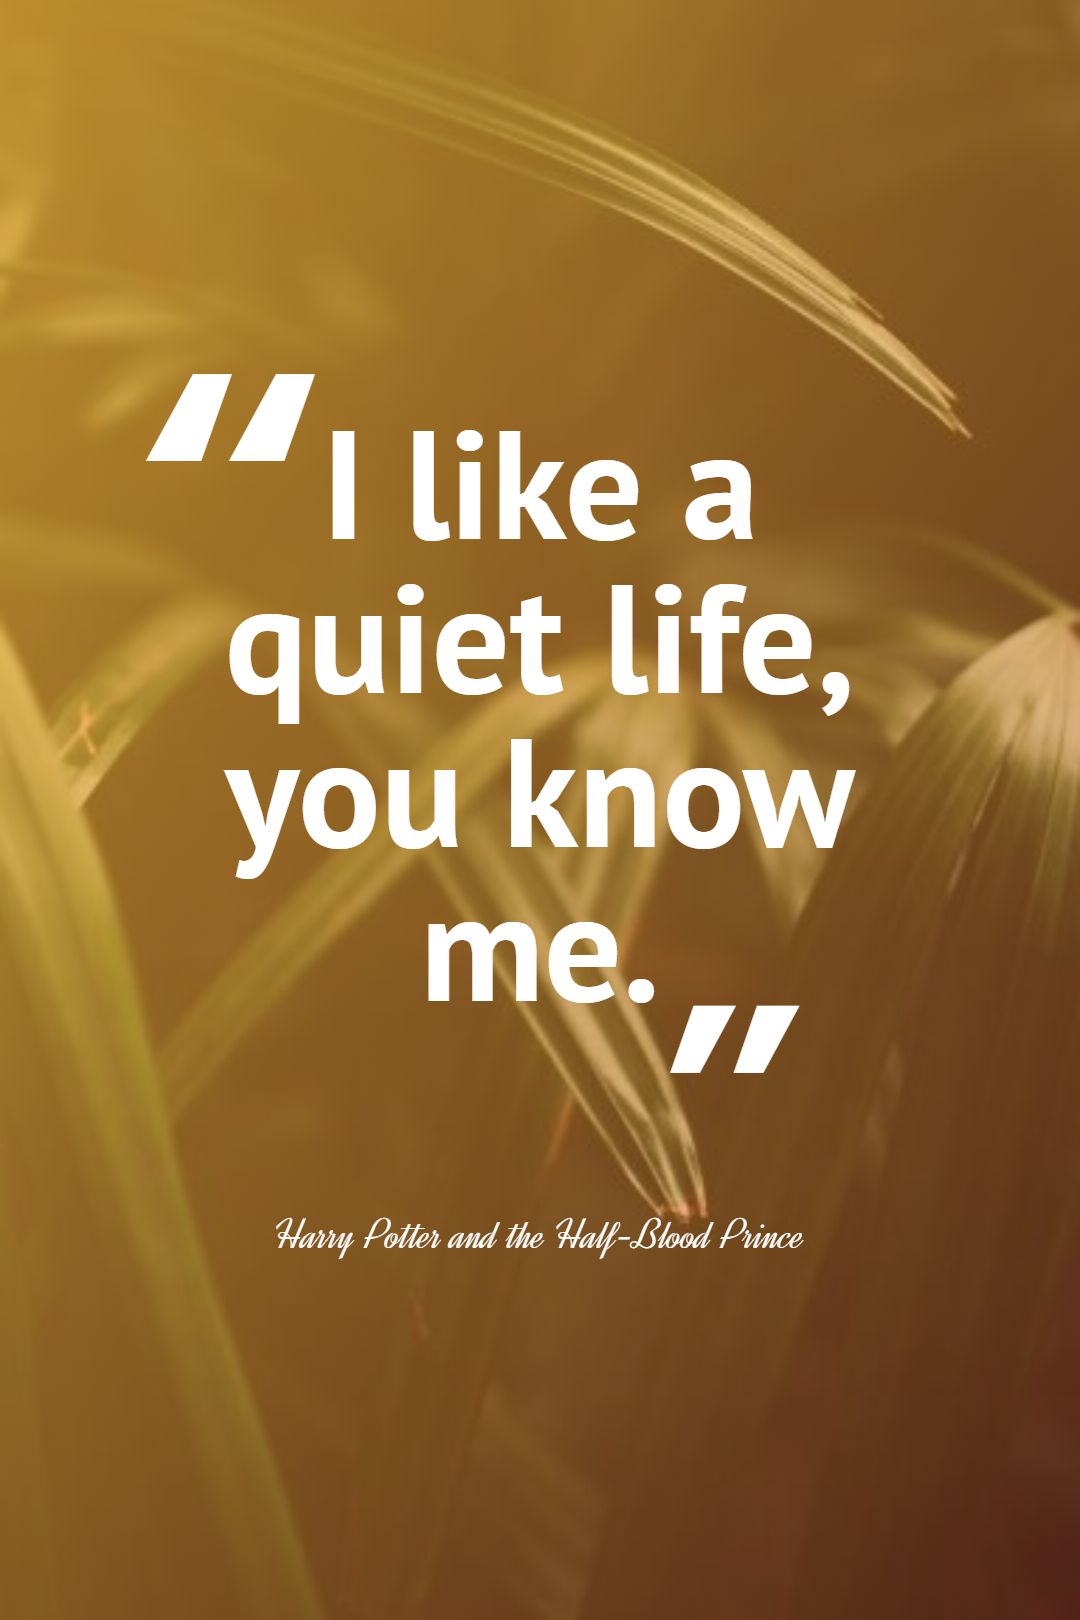 I like a quiet life you know me.